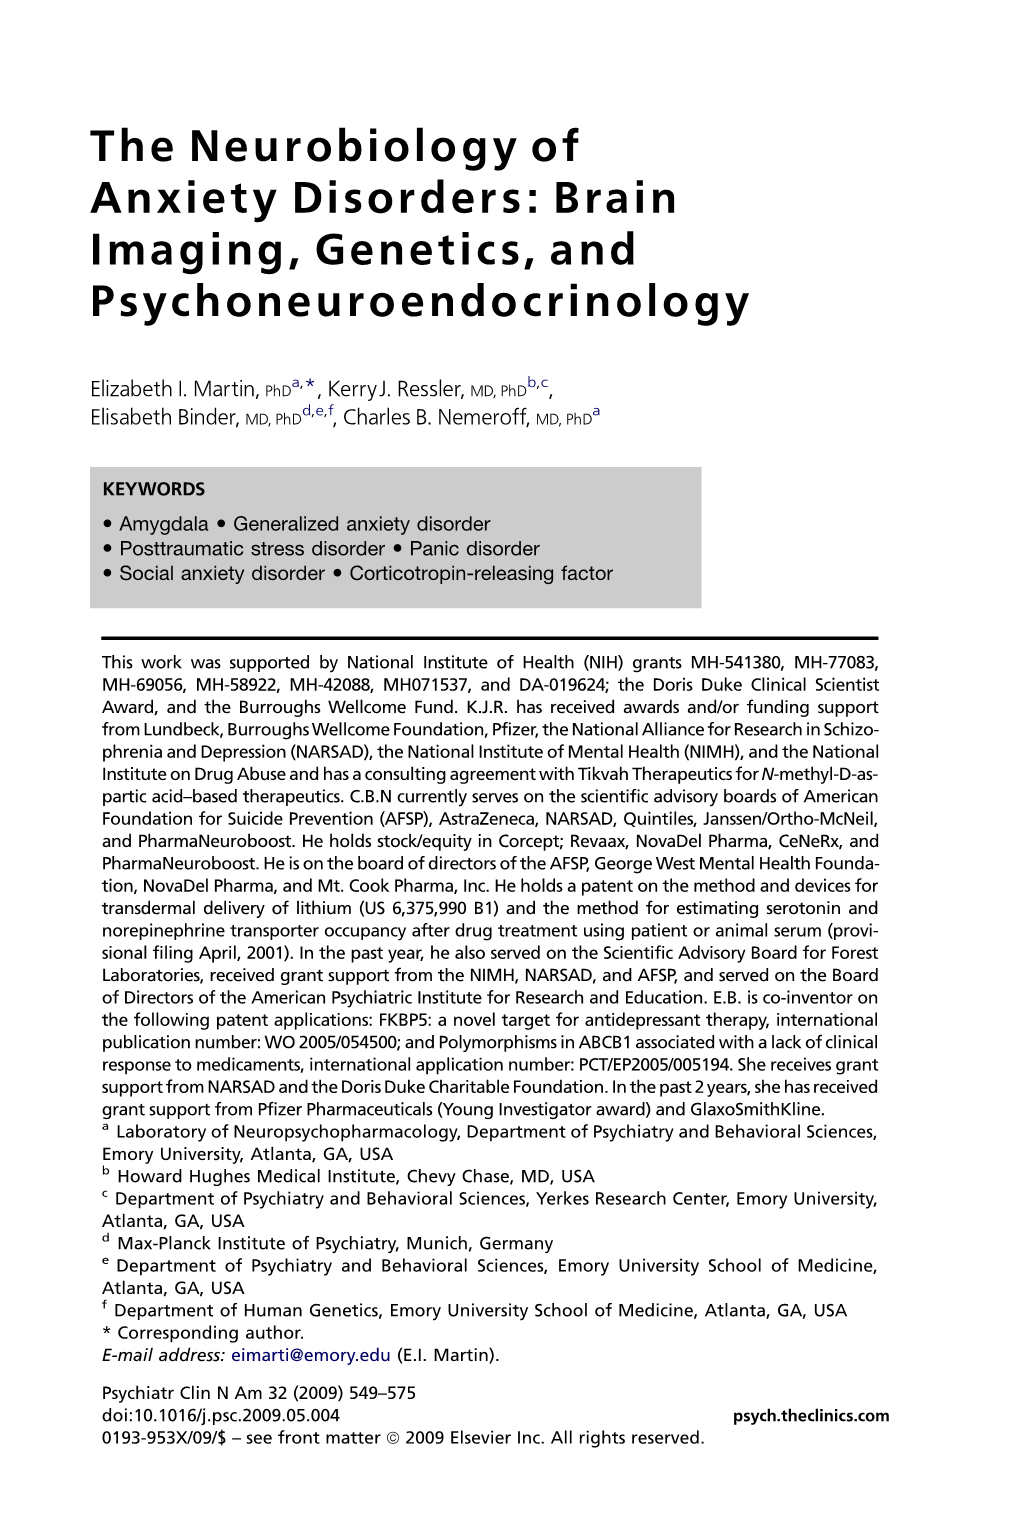 The Neurobiology of Anxiety Disorders: Brain Imaging, Genetics, and Psychoneuroendocrinology